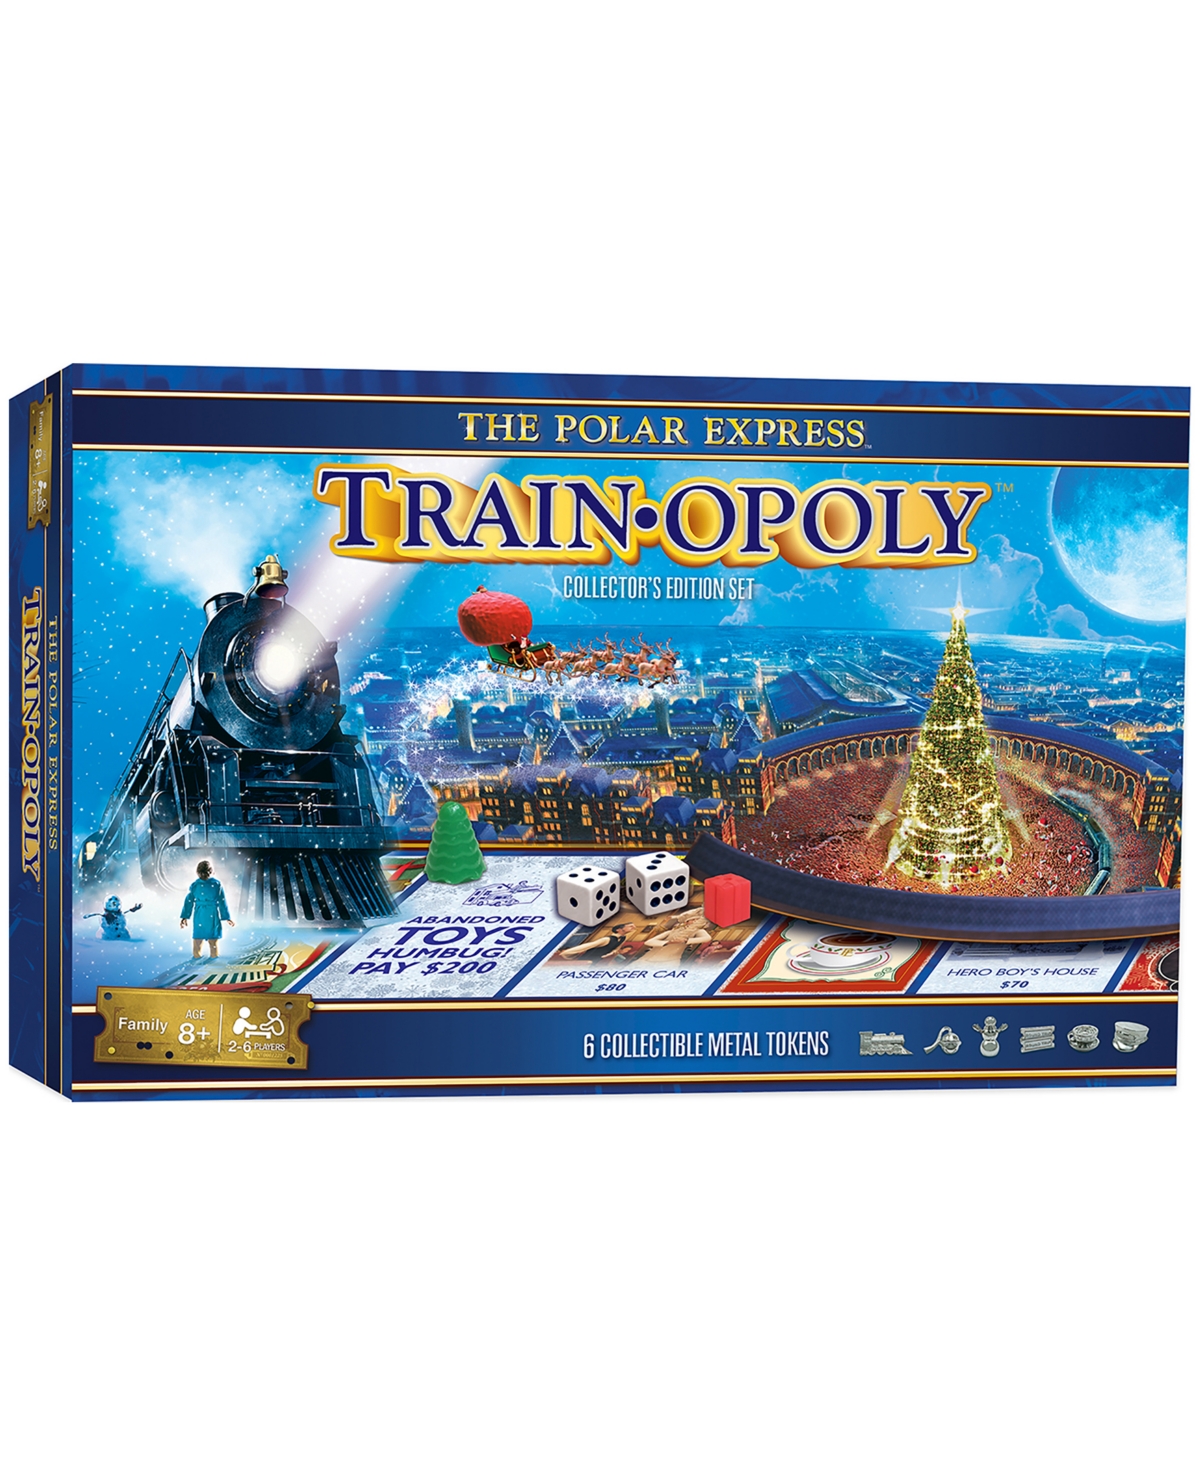 University Games Masterpieces Puzzles The Polar Express Train-opoly Collector's Edition Set In No Color